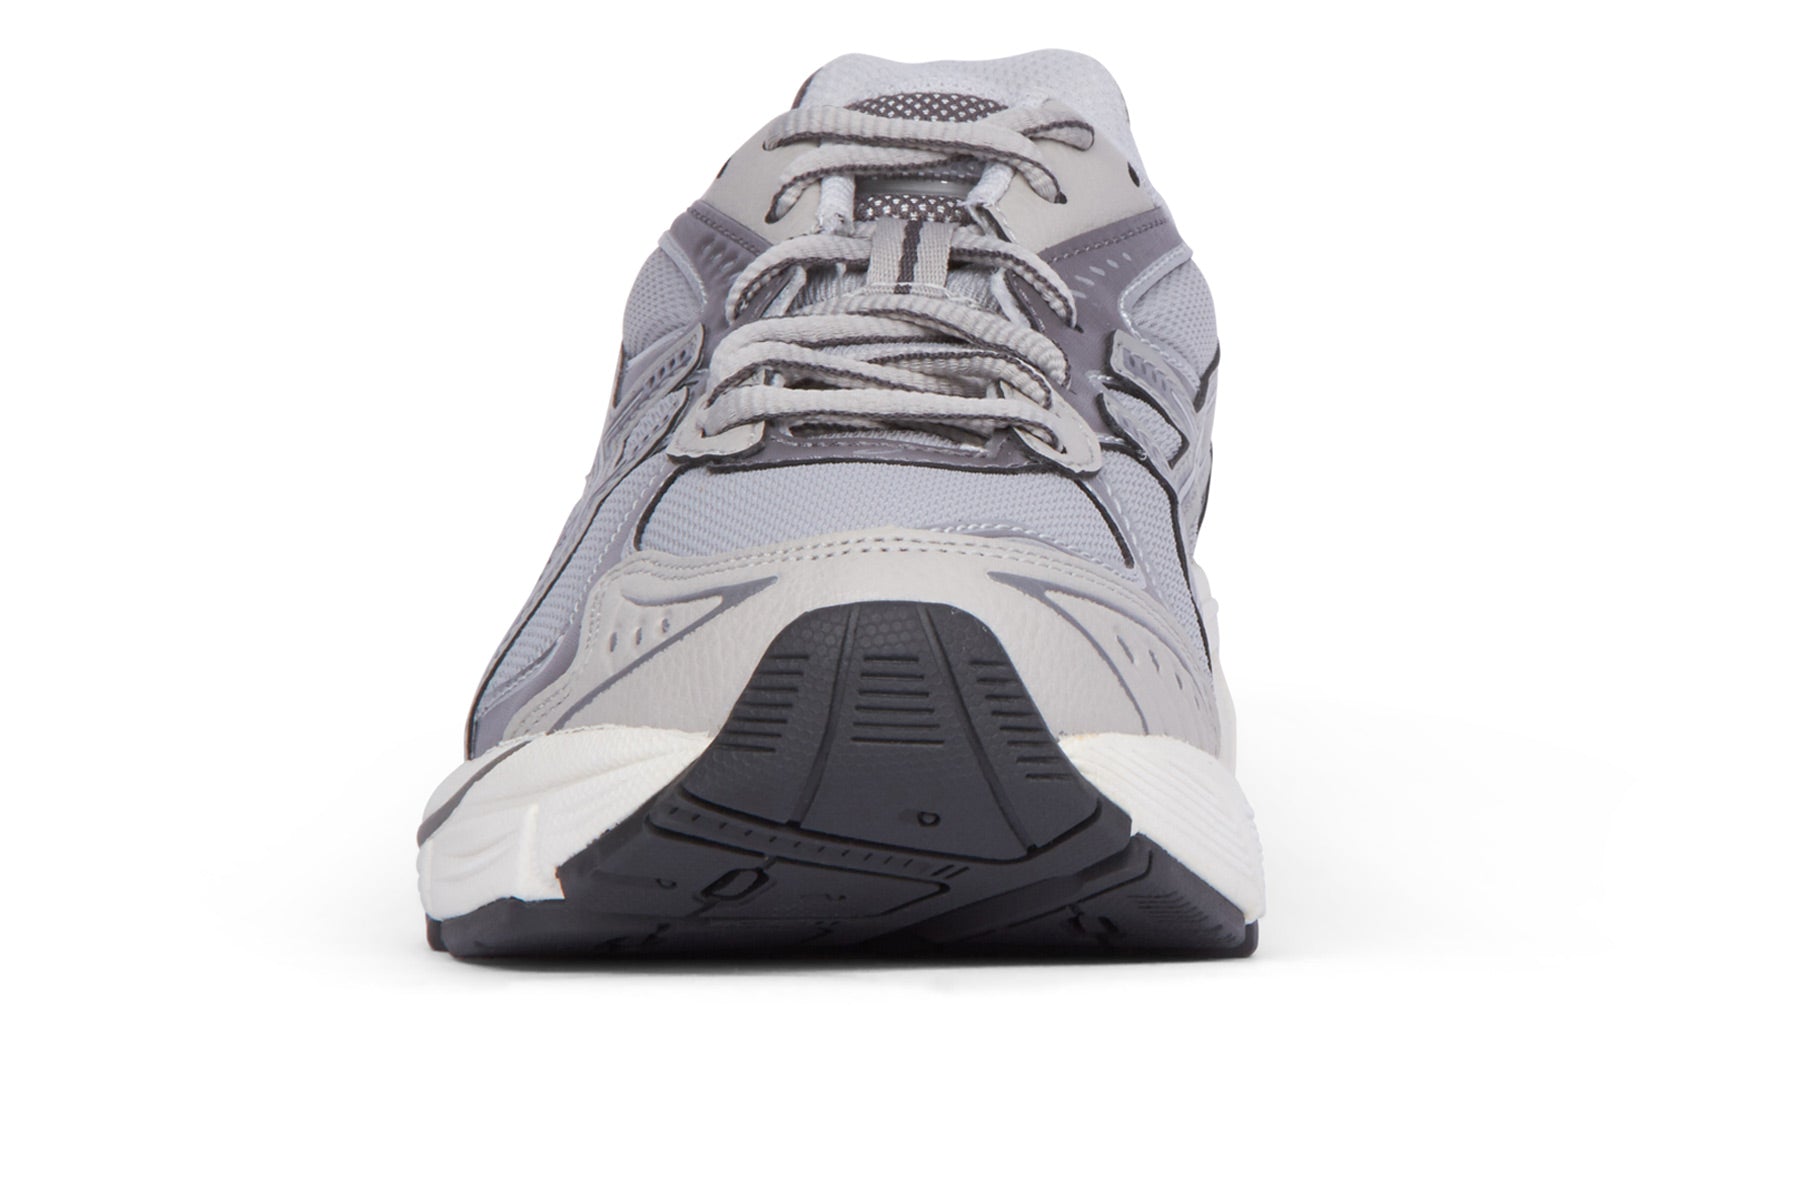 Asics GT 2160 - Oyster Grey/Carbon